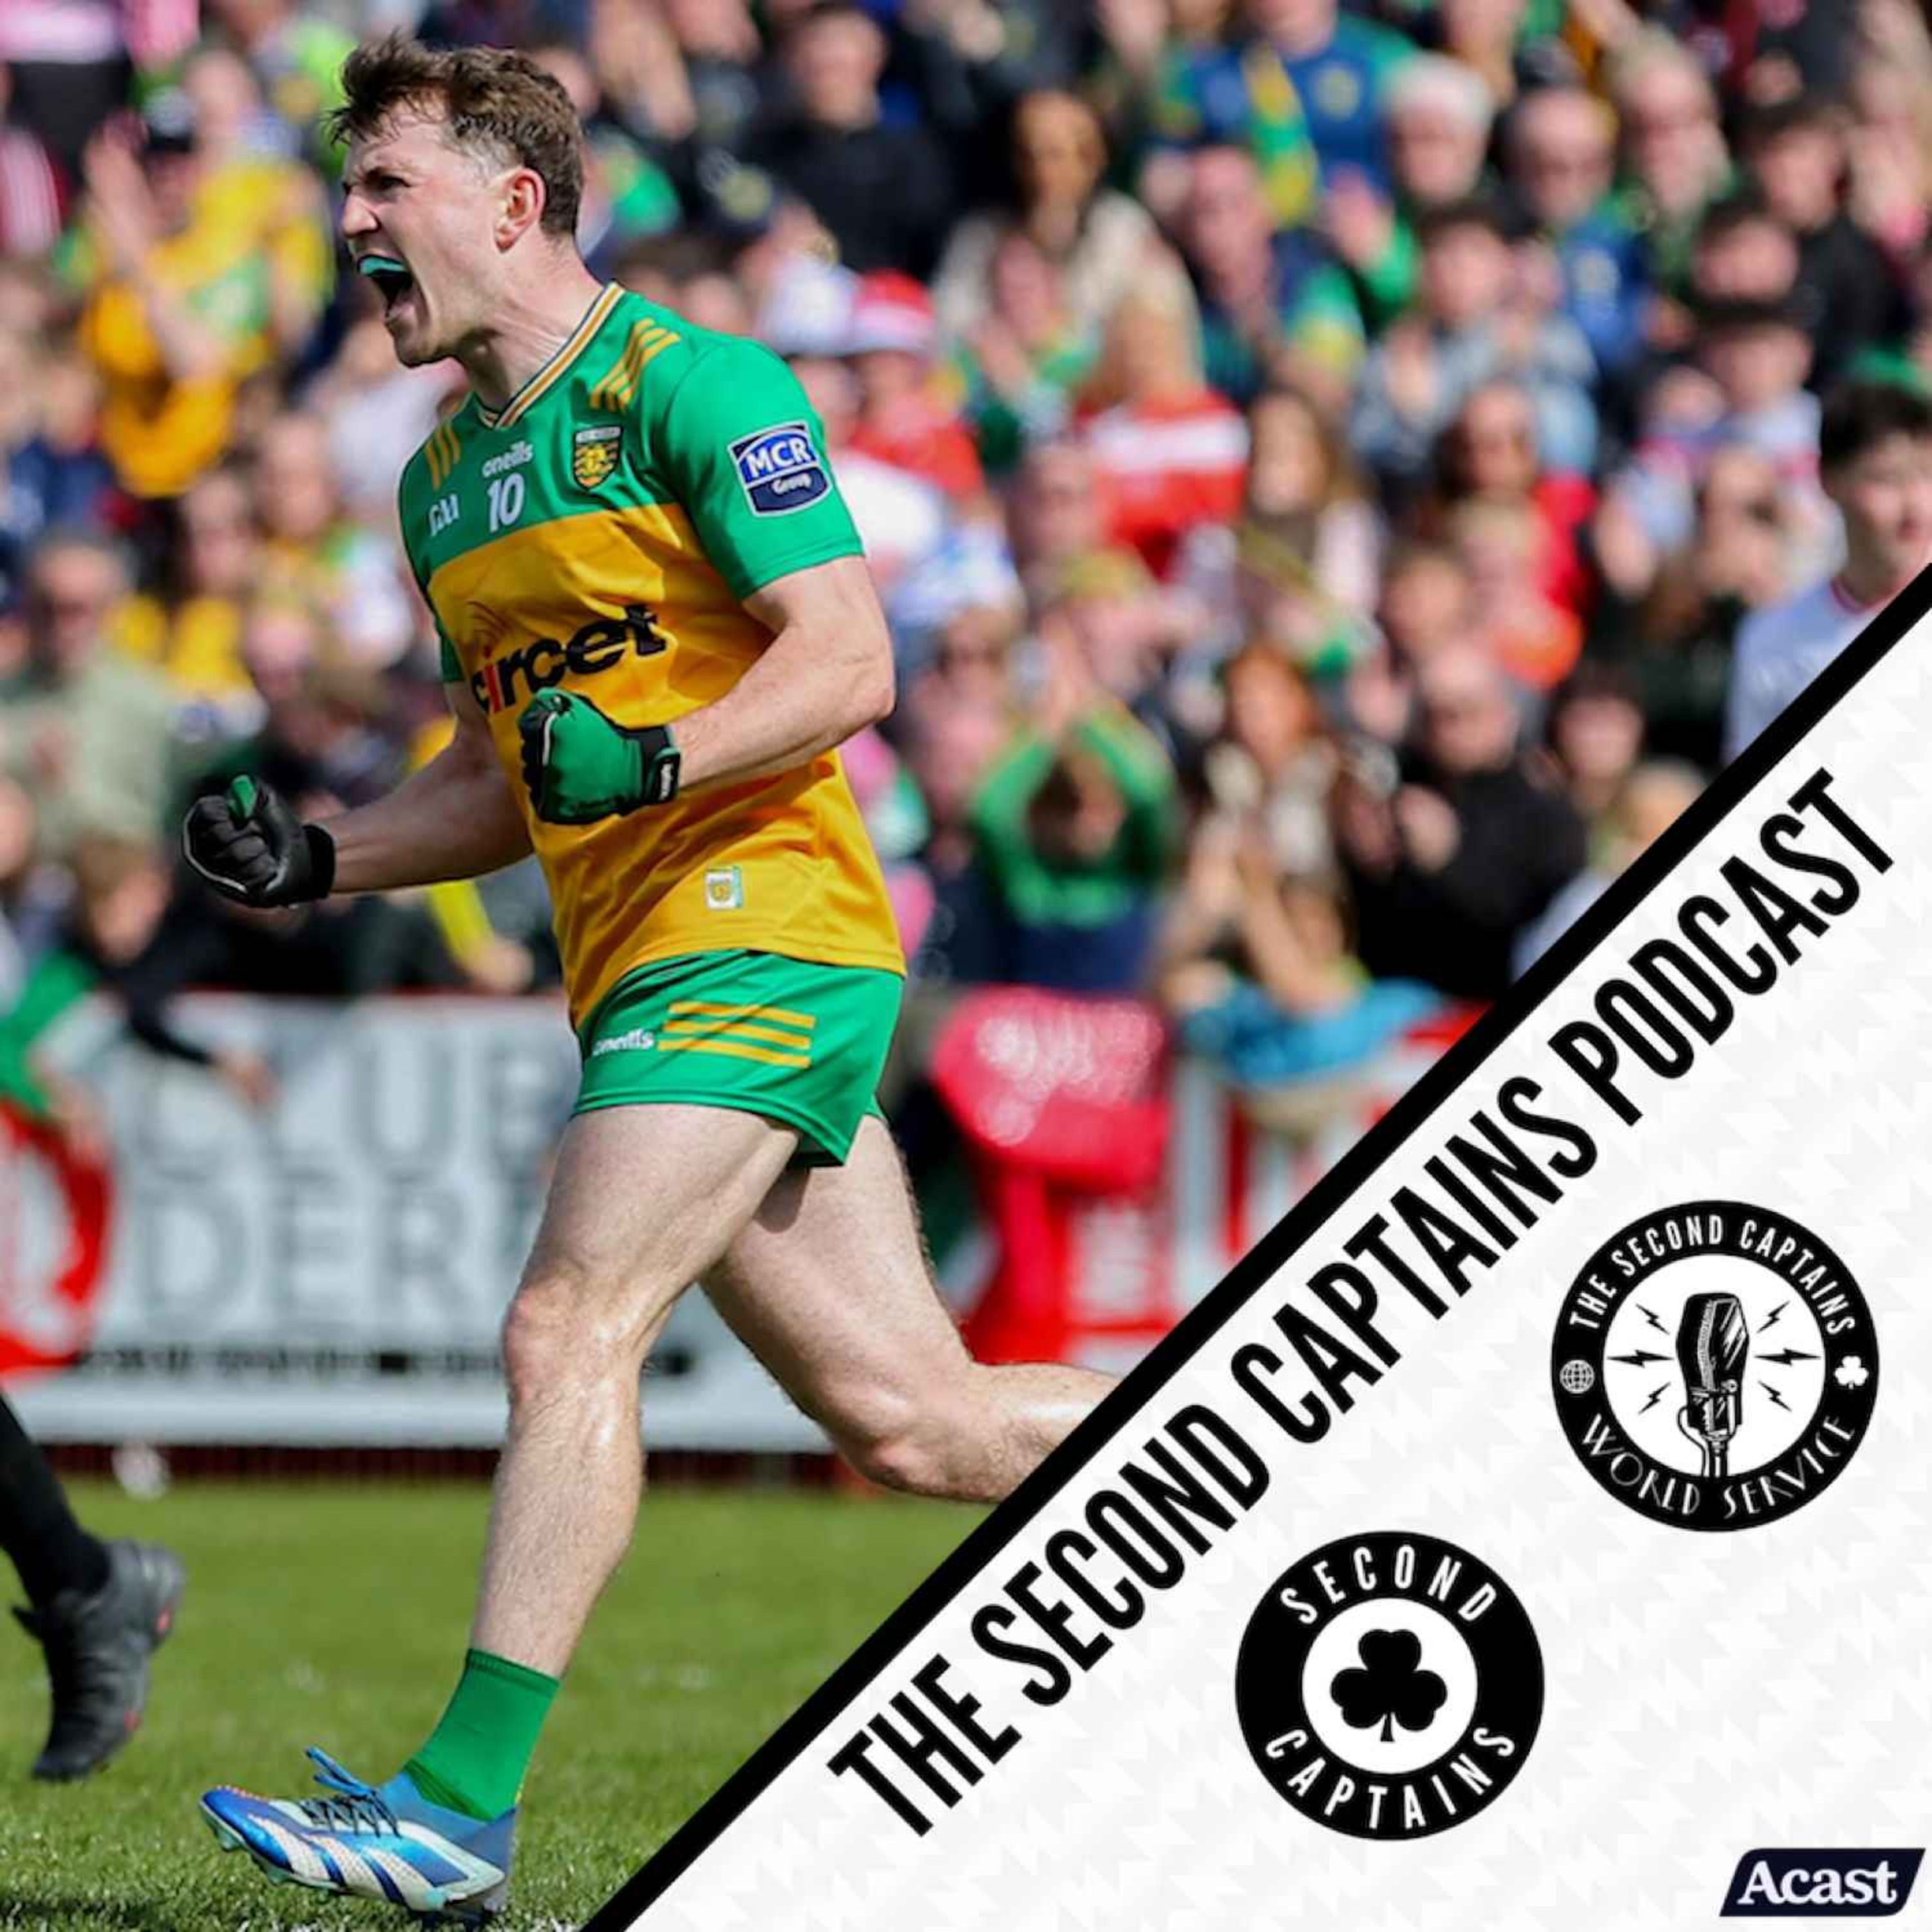 Ep 2928: Football Provincials Take Shape, Dogged Donegal, Rory’s Journey - 29/04/24